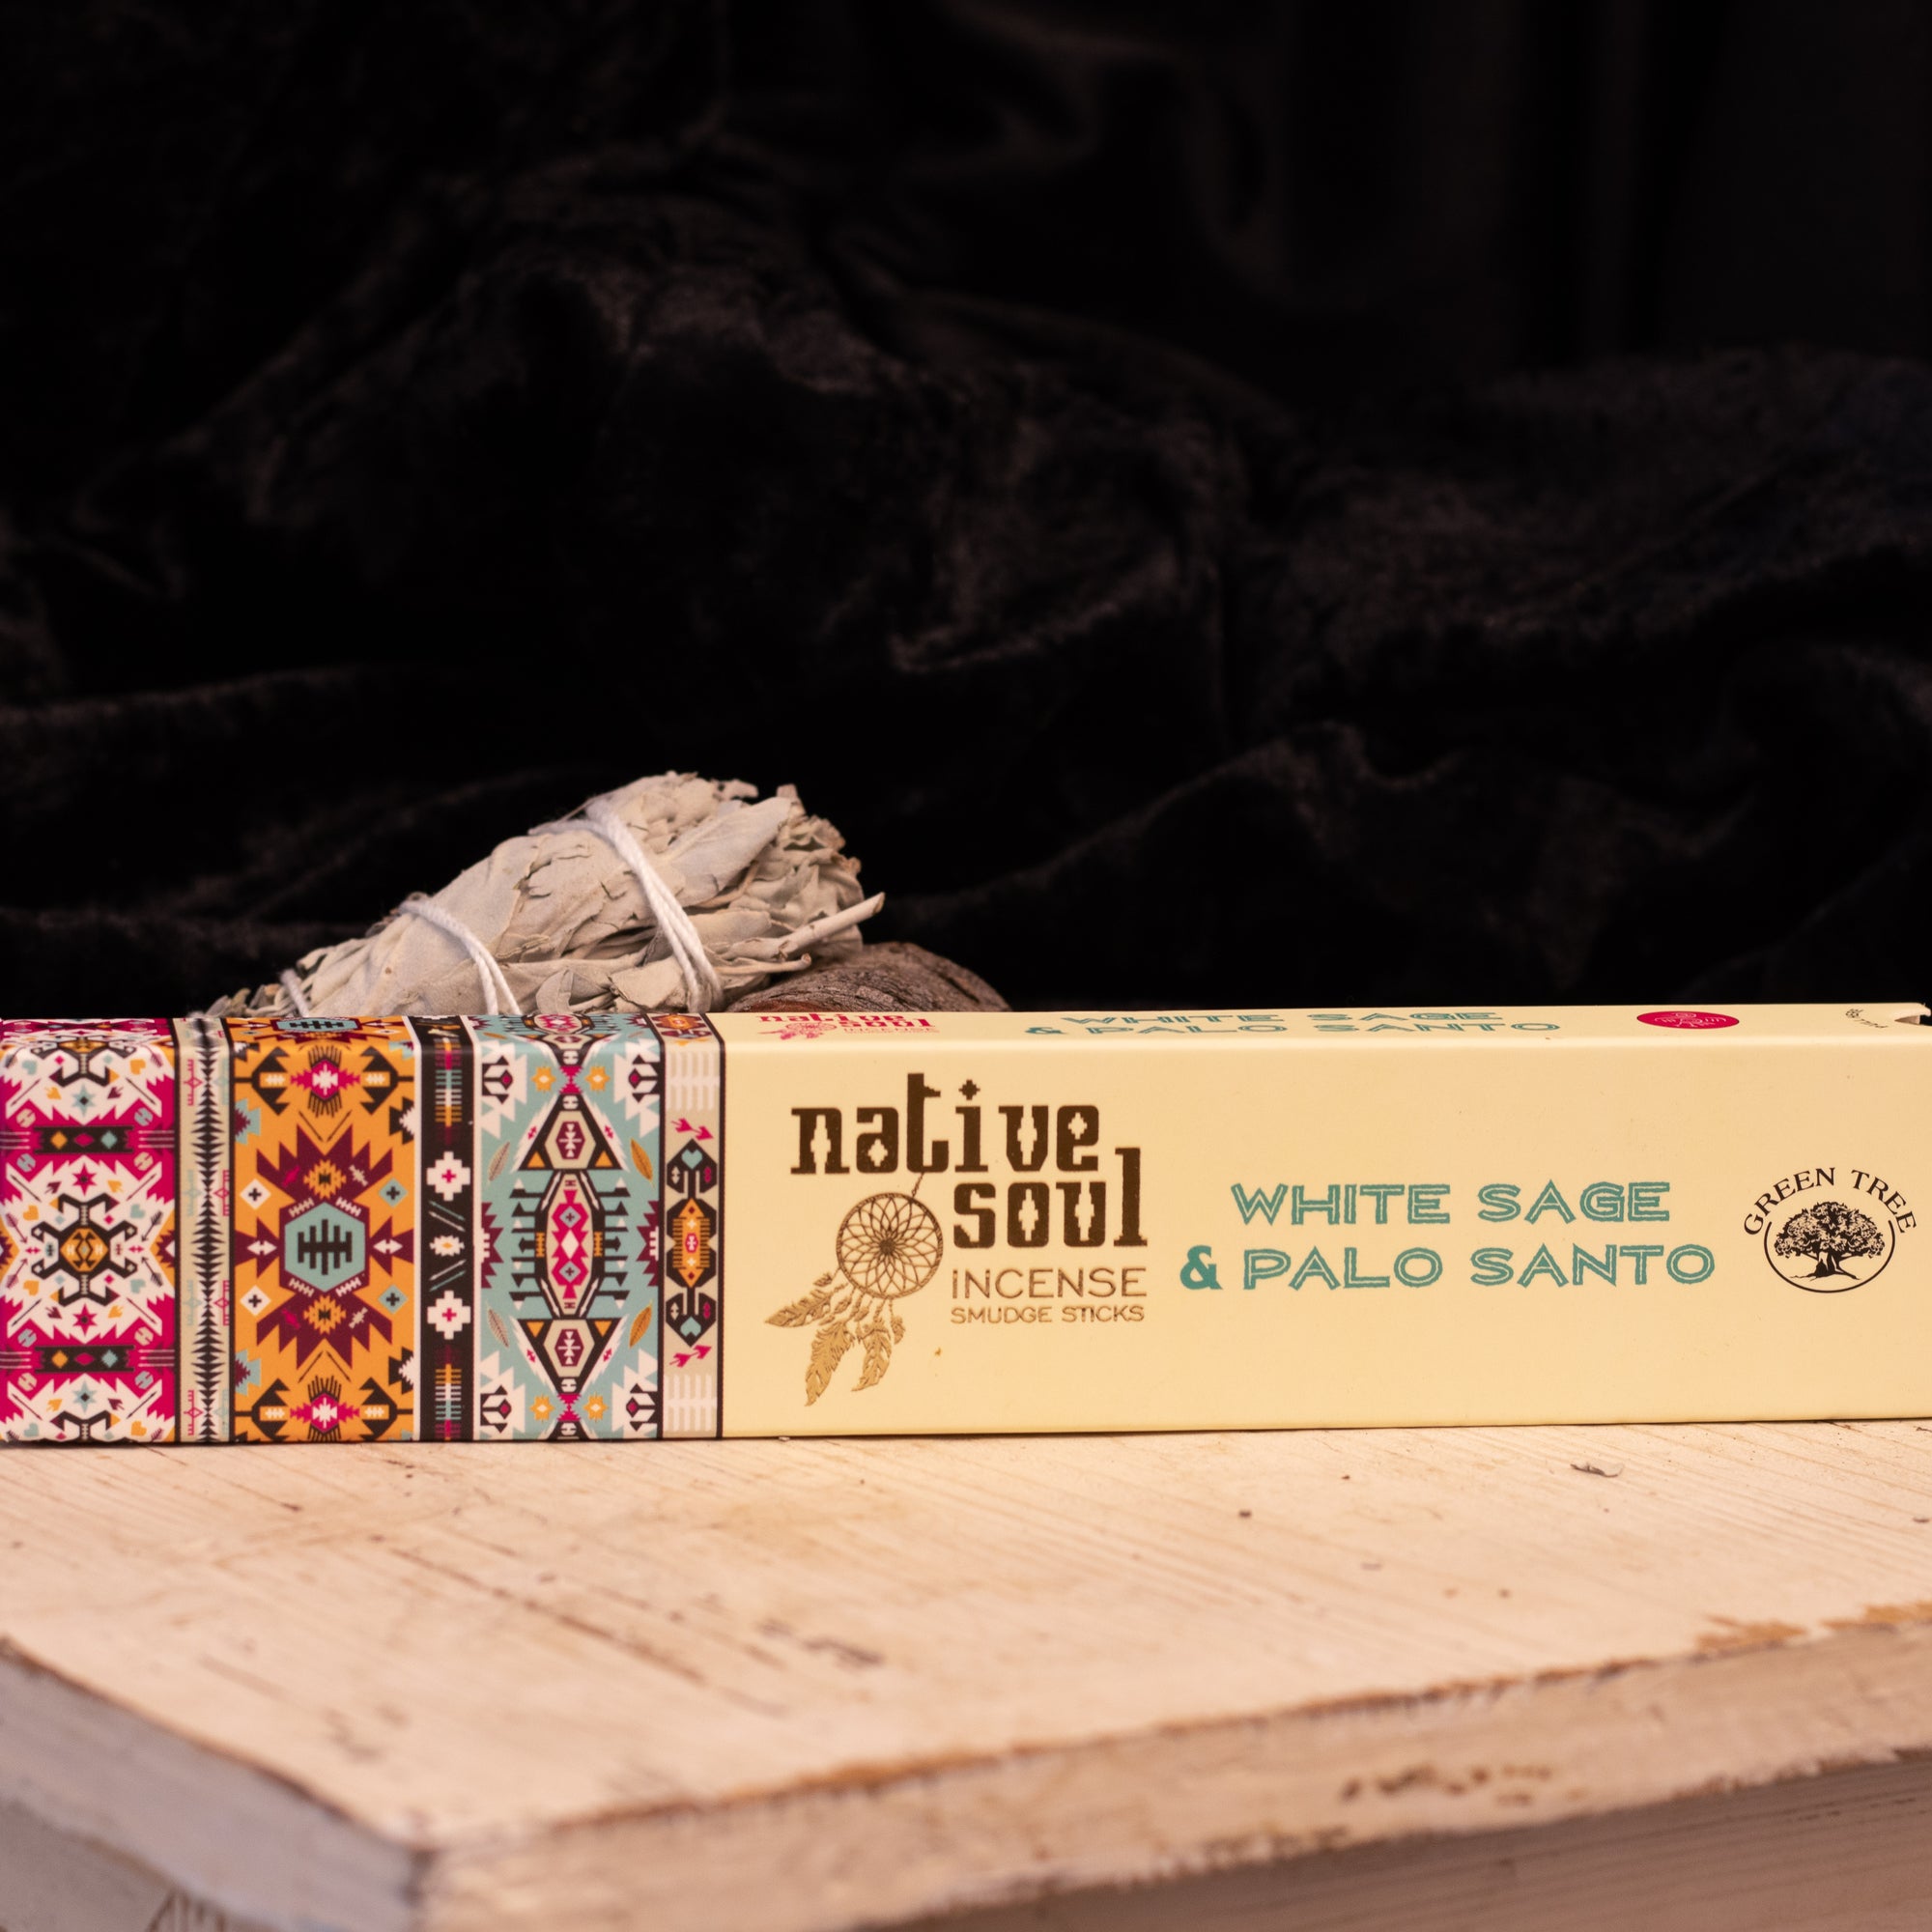 Native Soul White Sage and Palo Santo Incense - The Spirit of Life